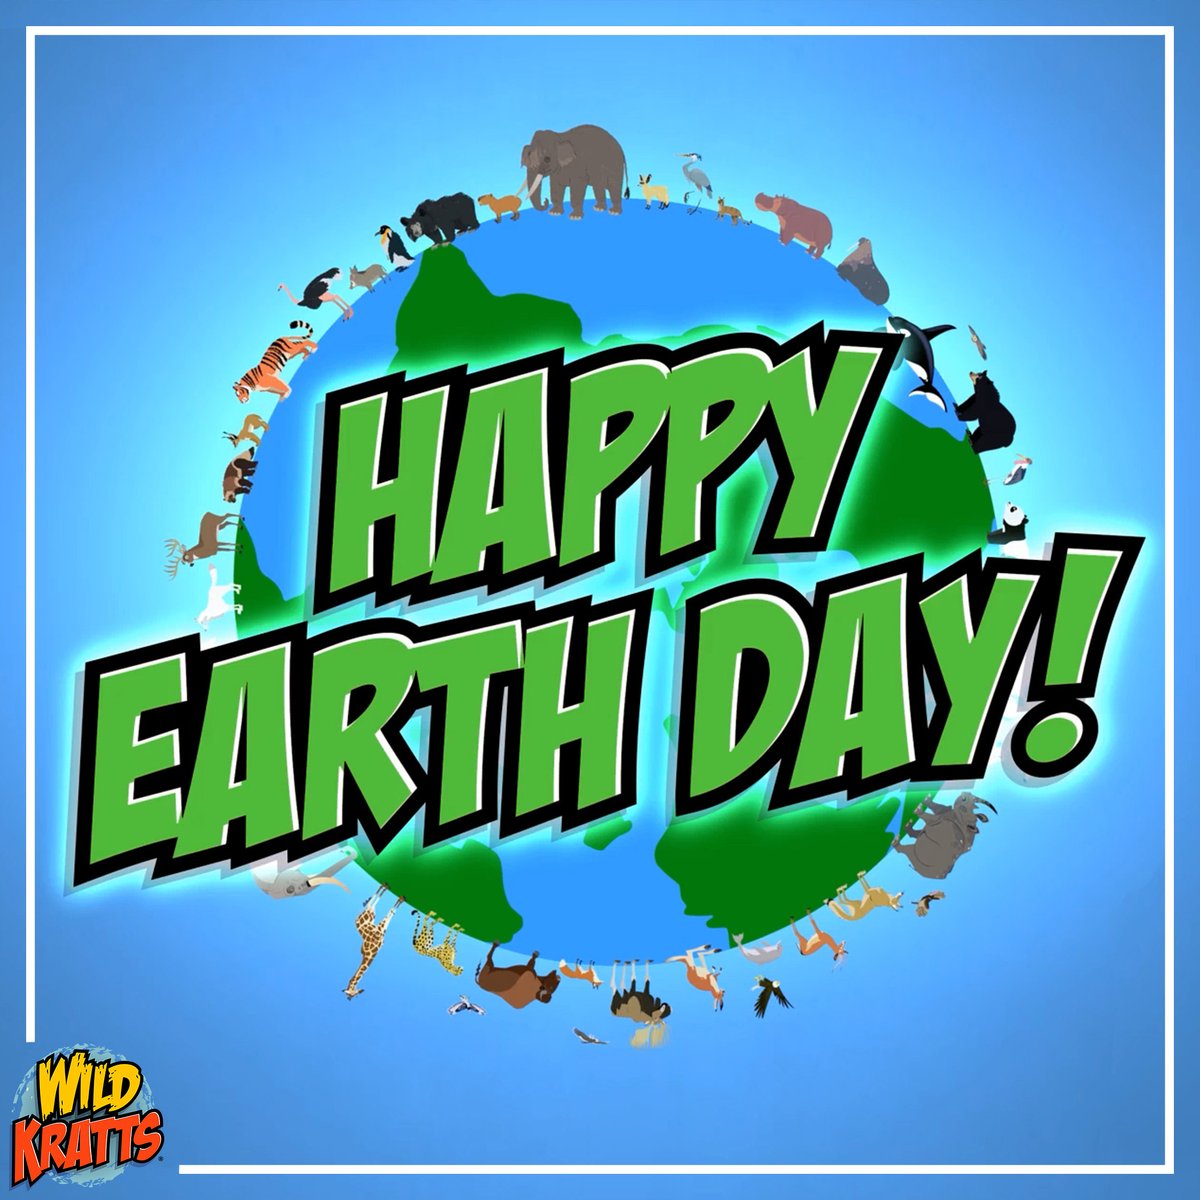 Happy Earth Day! 🌎 Today we are celebrating our amazing planet and all the animals that live here! Whether you think 'blue is better' or 'green is greater', both our blue oceans and green forests are home to so many of our fellow creatures! So let's celebrate them all! 💙 💚